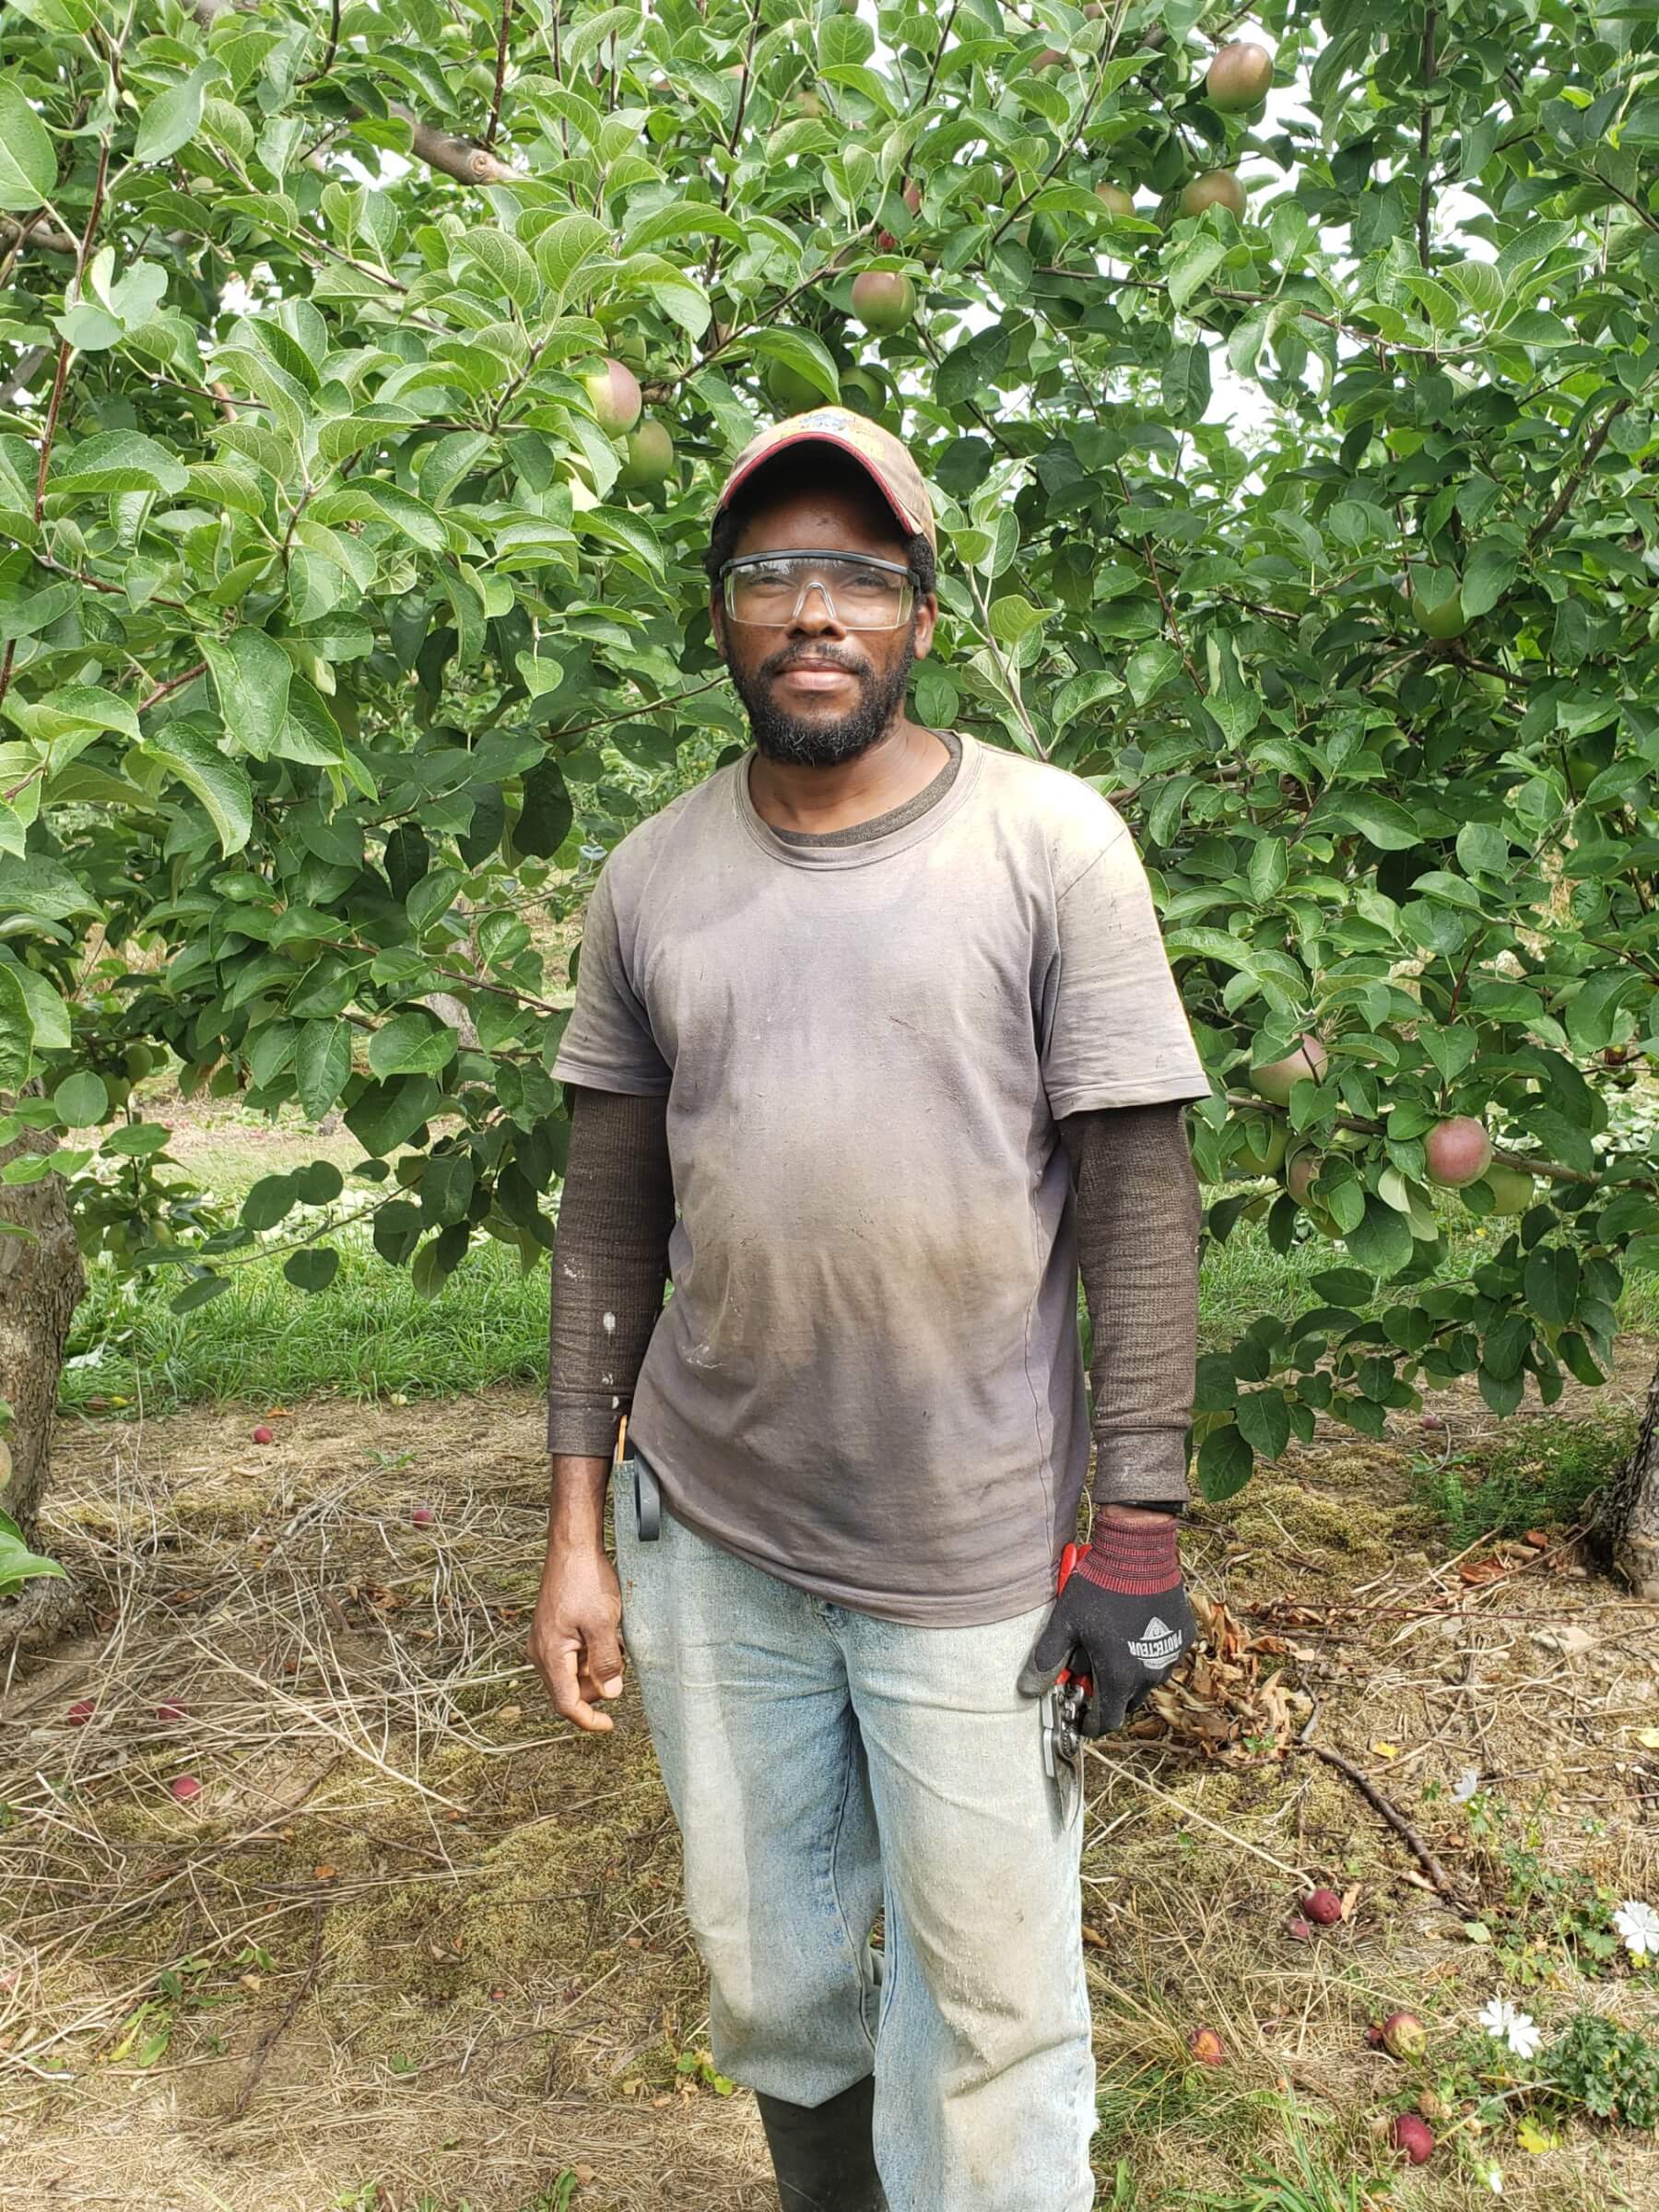 Baker, Seasonal Agricultural Worker from Jamaica, work in an Ontario apple orchard